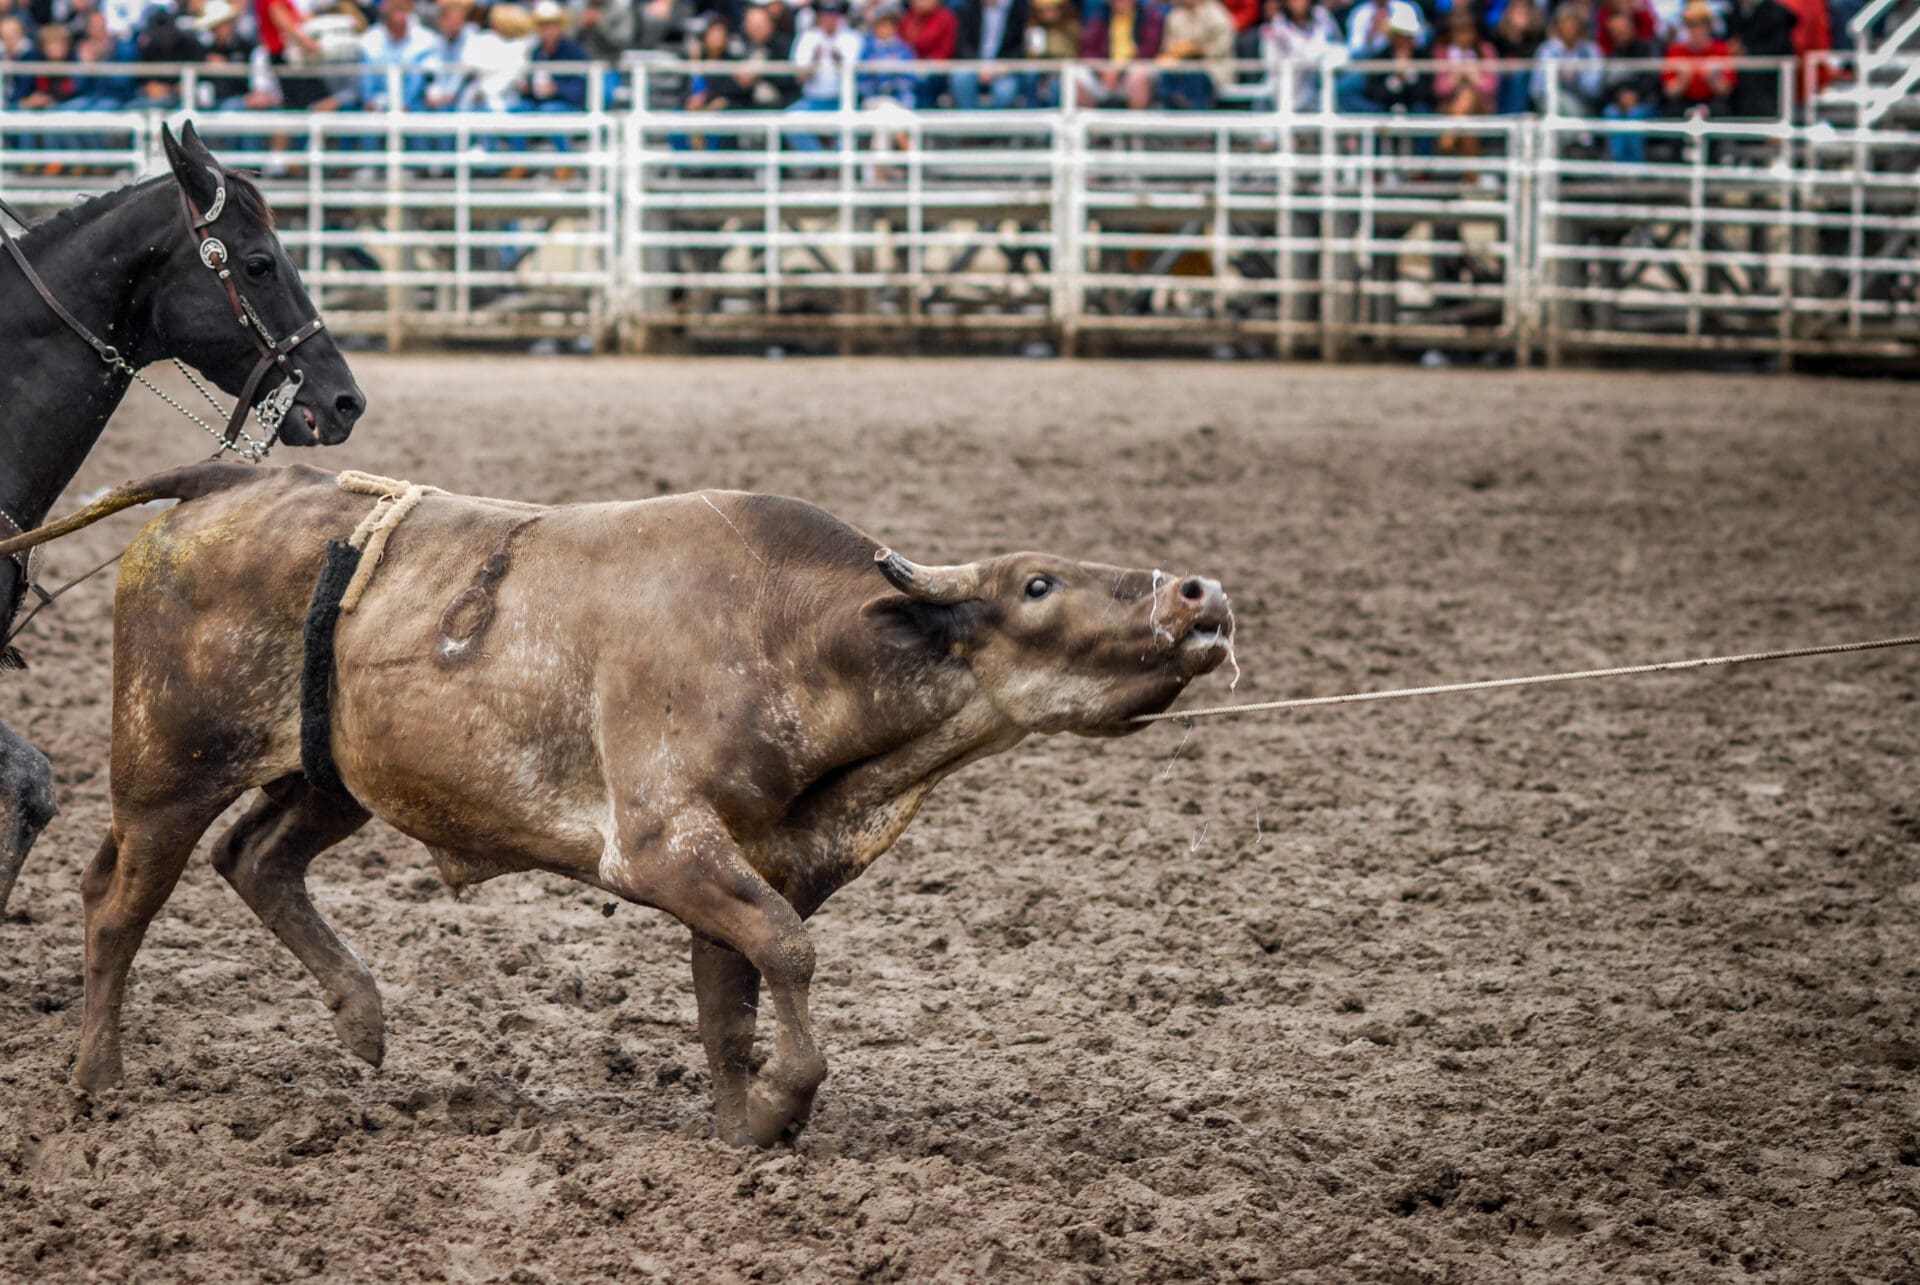 A bull in the ring at The Calgary Stampede rodeo